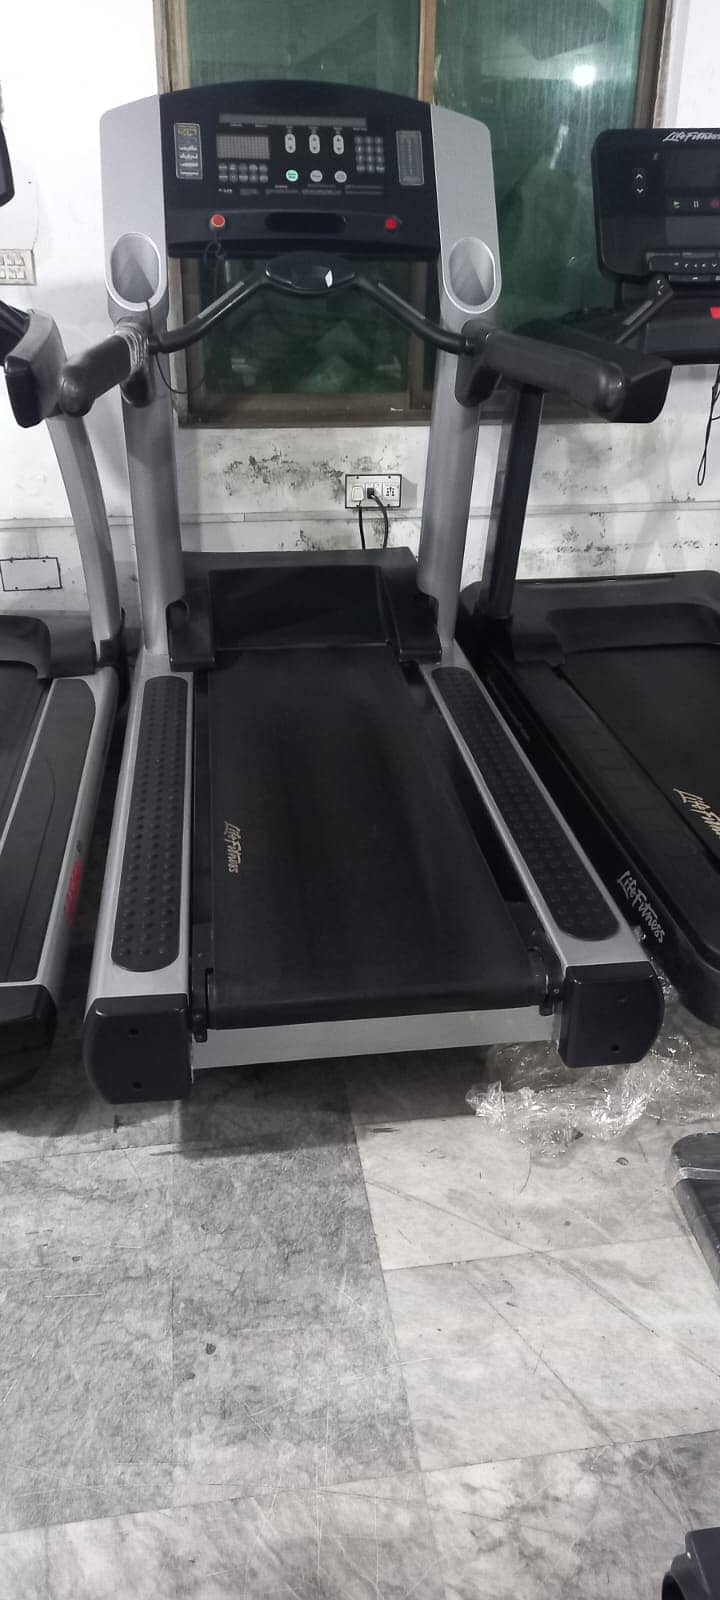 Treadmill Life fitness USA American Brand Refurbished Available 15